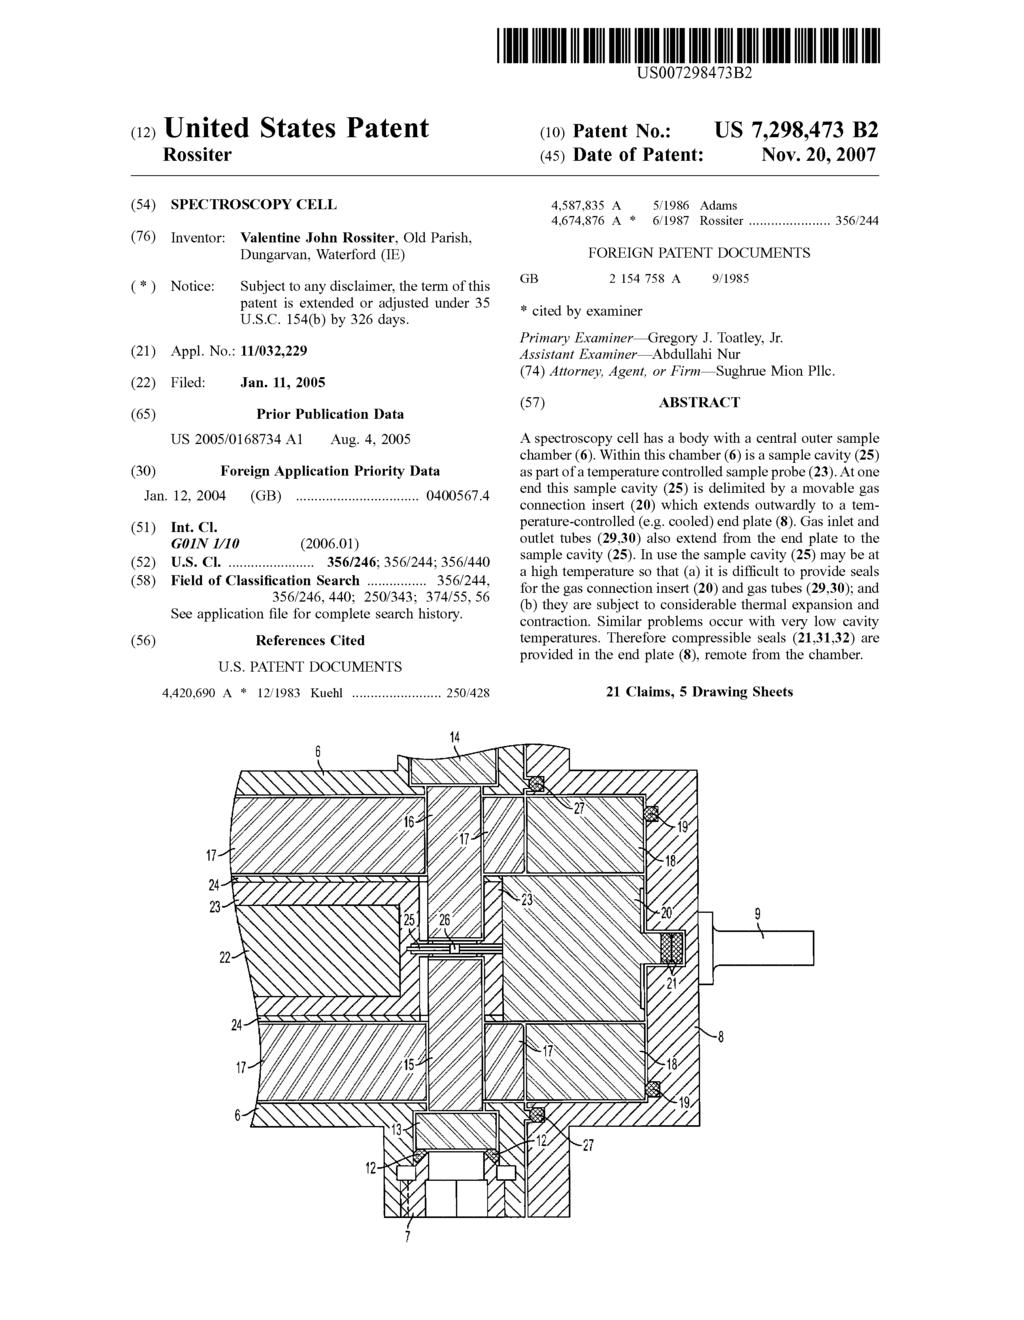 (12) United States Patent US007298.473B2 (10) Patent o.: US 7,298.473 B2 Rossiter (45) Date of Patent: ov. 20, 2007 (54) SPECTROSCOPY CELL 4,587,835 A 5/1986 Adams 4,674,876 A 6/1987 Rossiter.